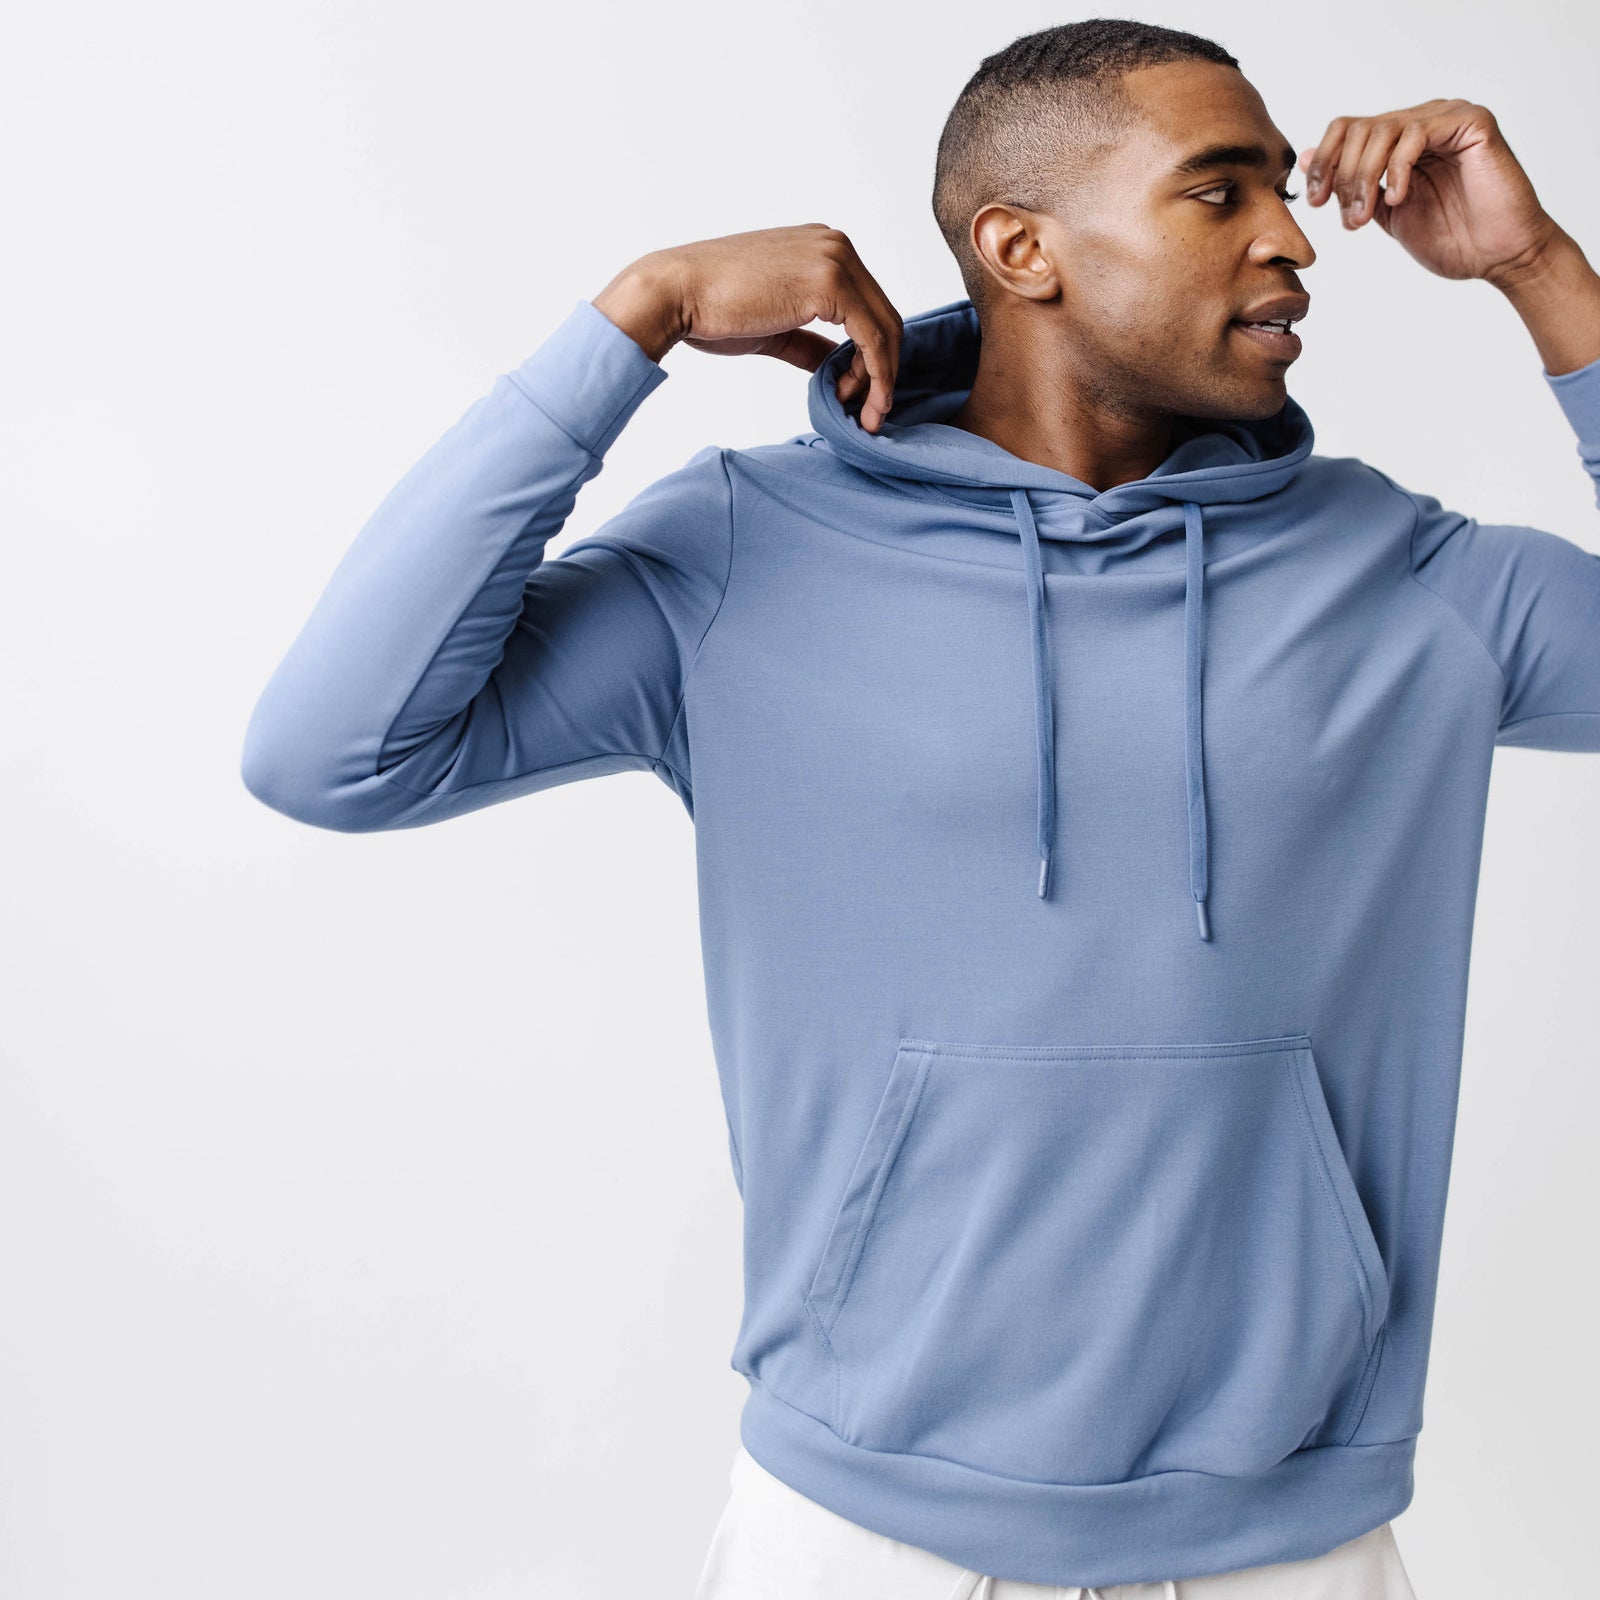 Blue Bamboo Hoodie worn by a man standing in front of white background.